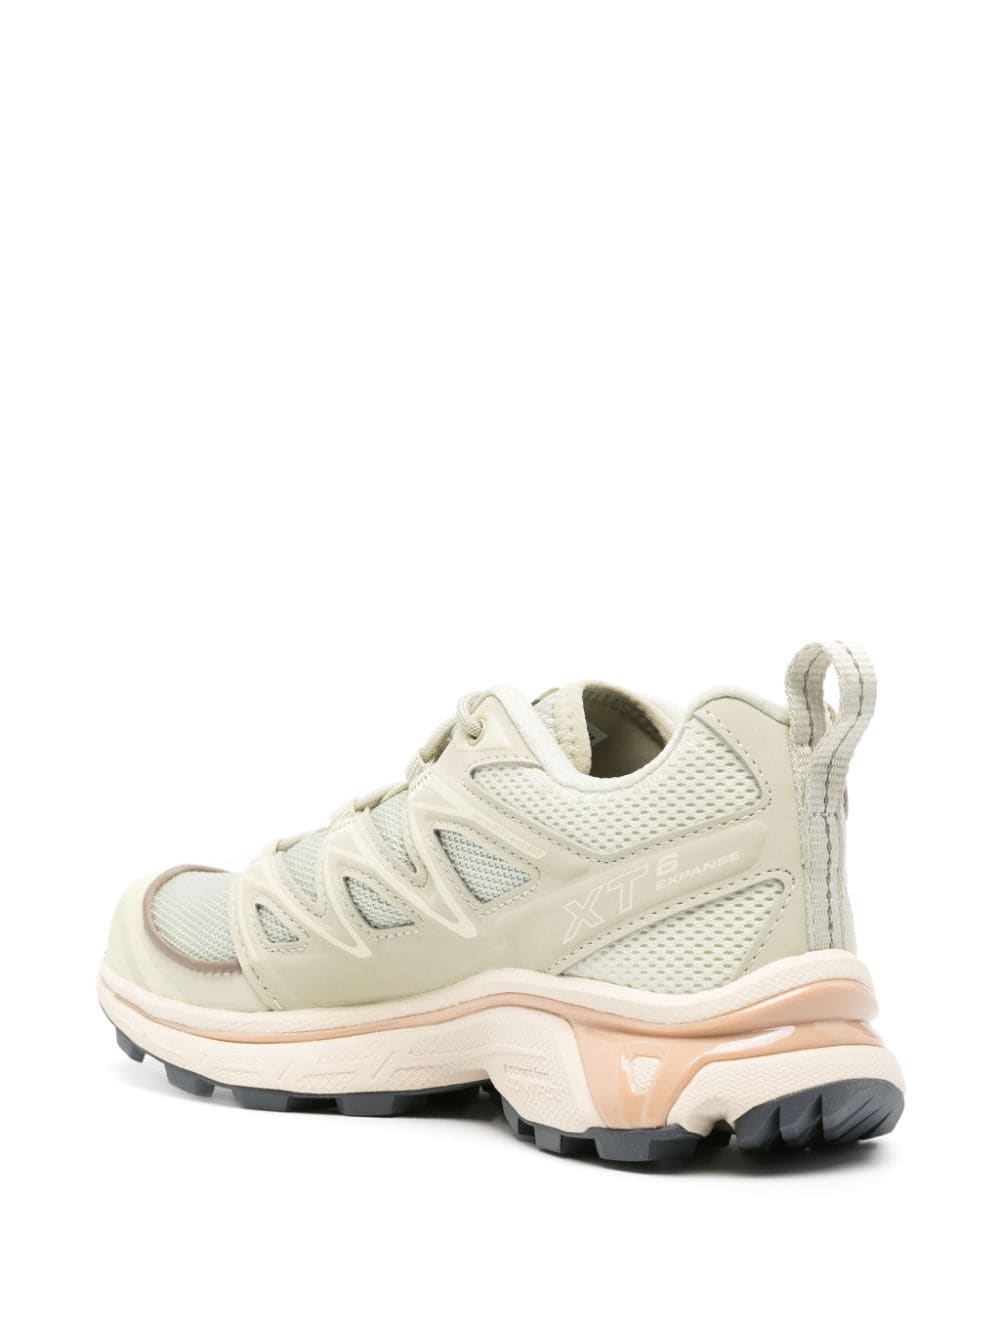 XT-6 Expanse sneakers<BR/><BR/><BR/>